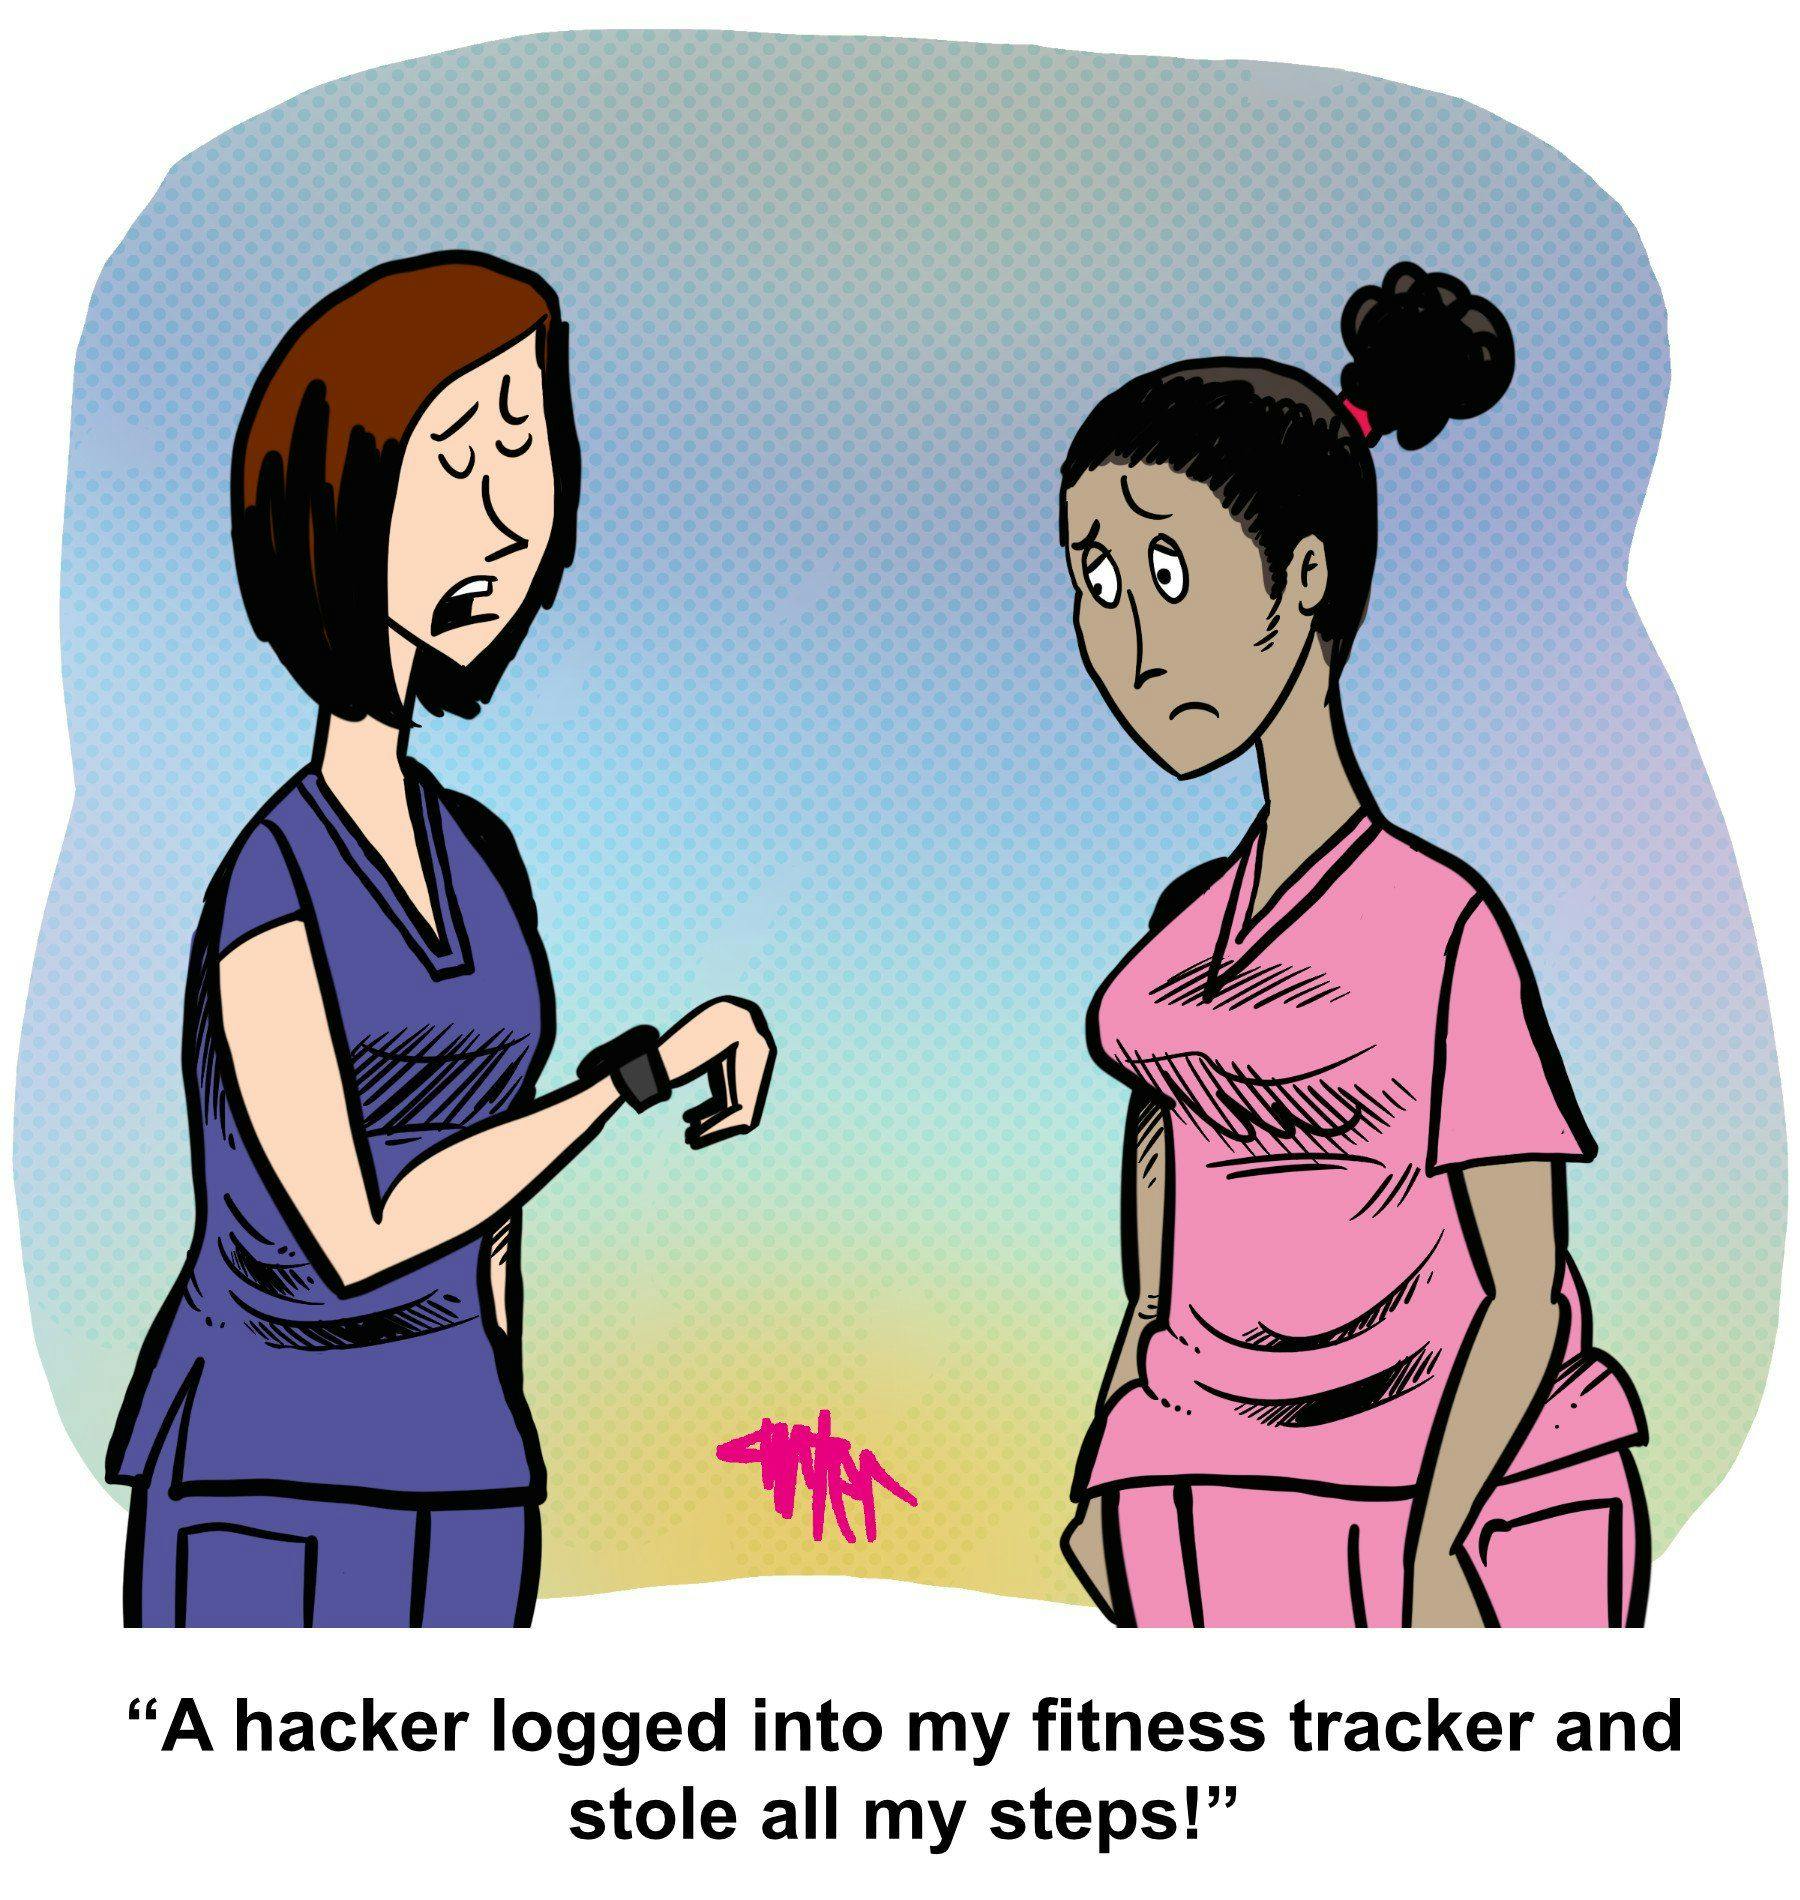 Hackers steal fitness achievements